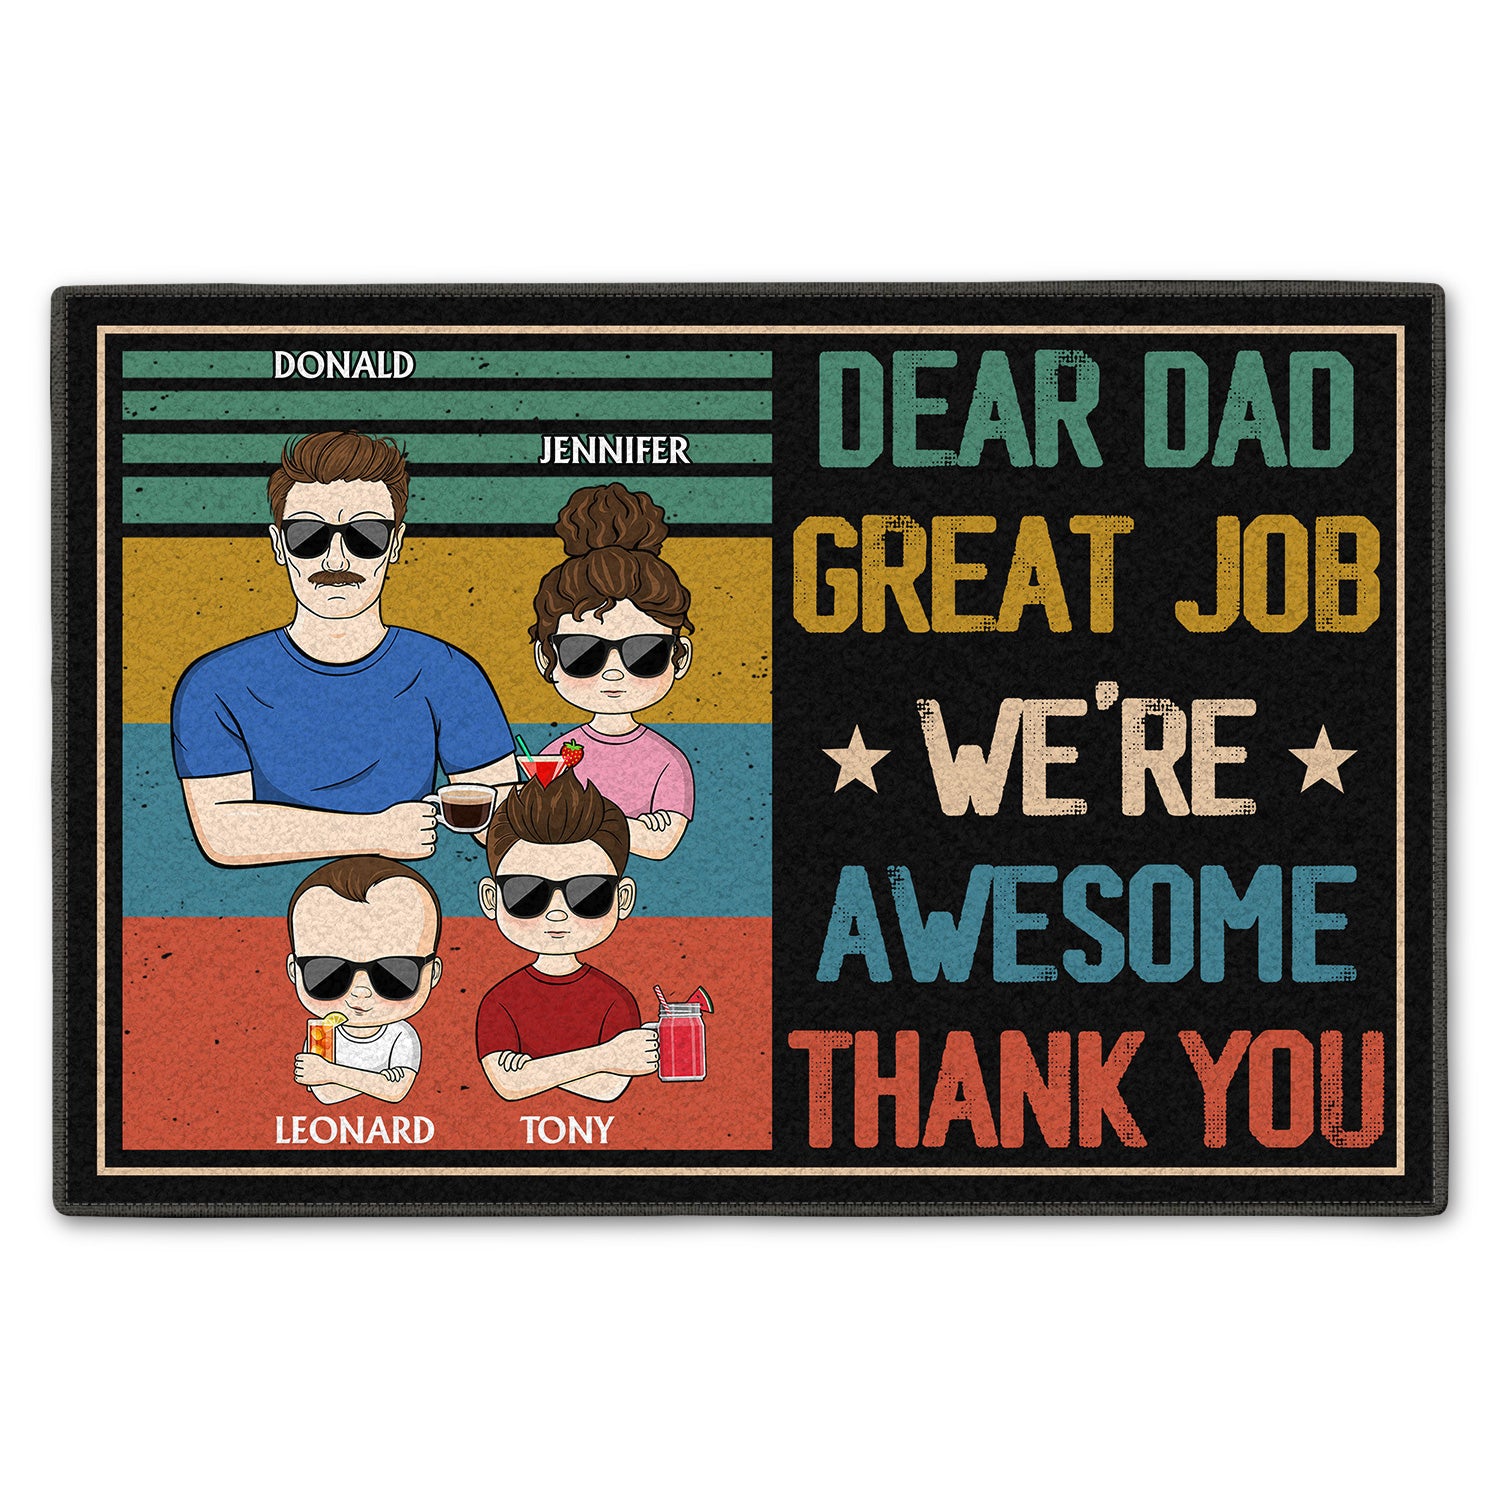 Dear Dad Great Job We're Awesome Thank You Young - Birthday, Loving Gift For Father, Grandpa, Grandfather - Personalized Custom Doormat